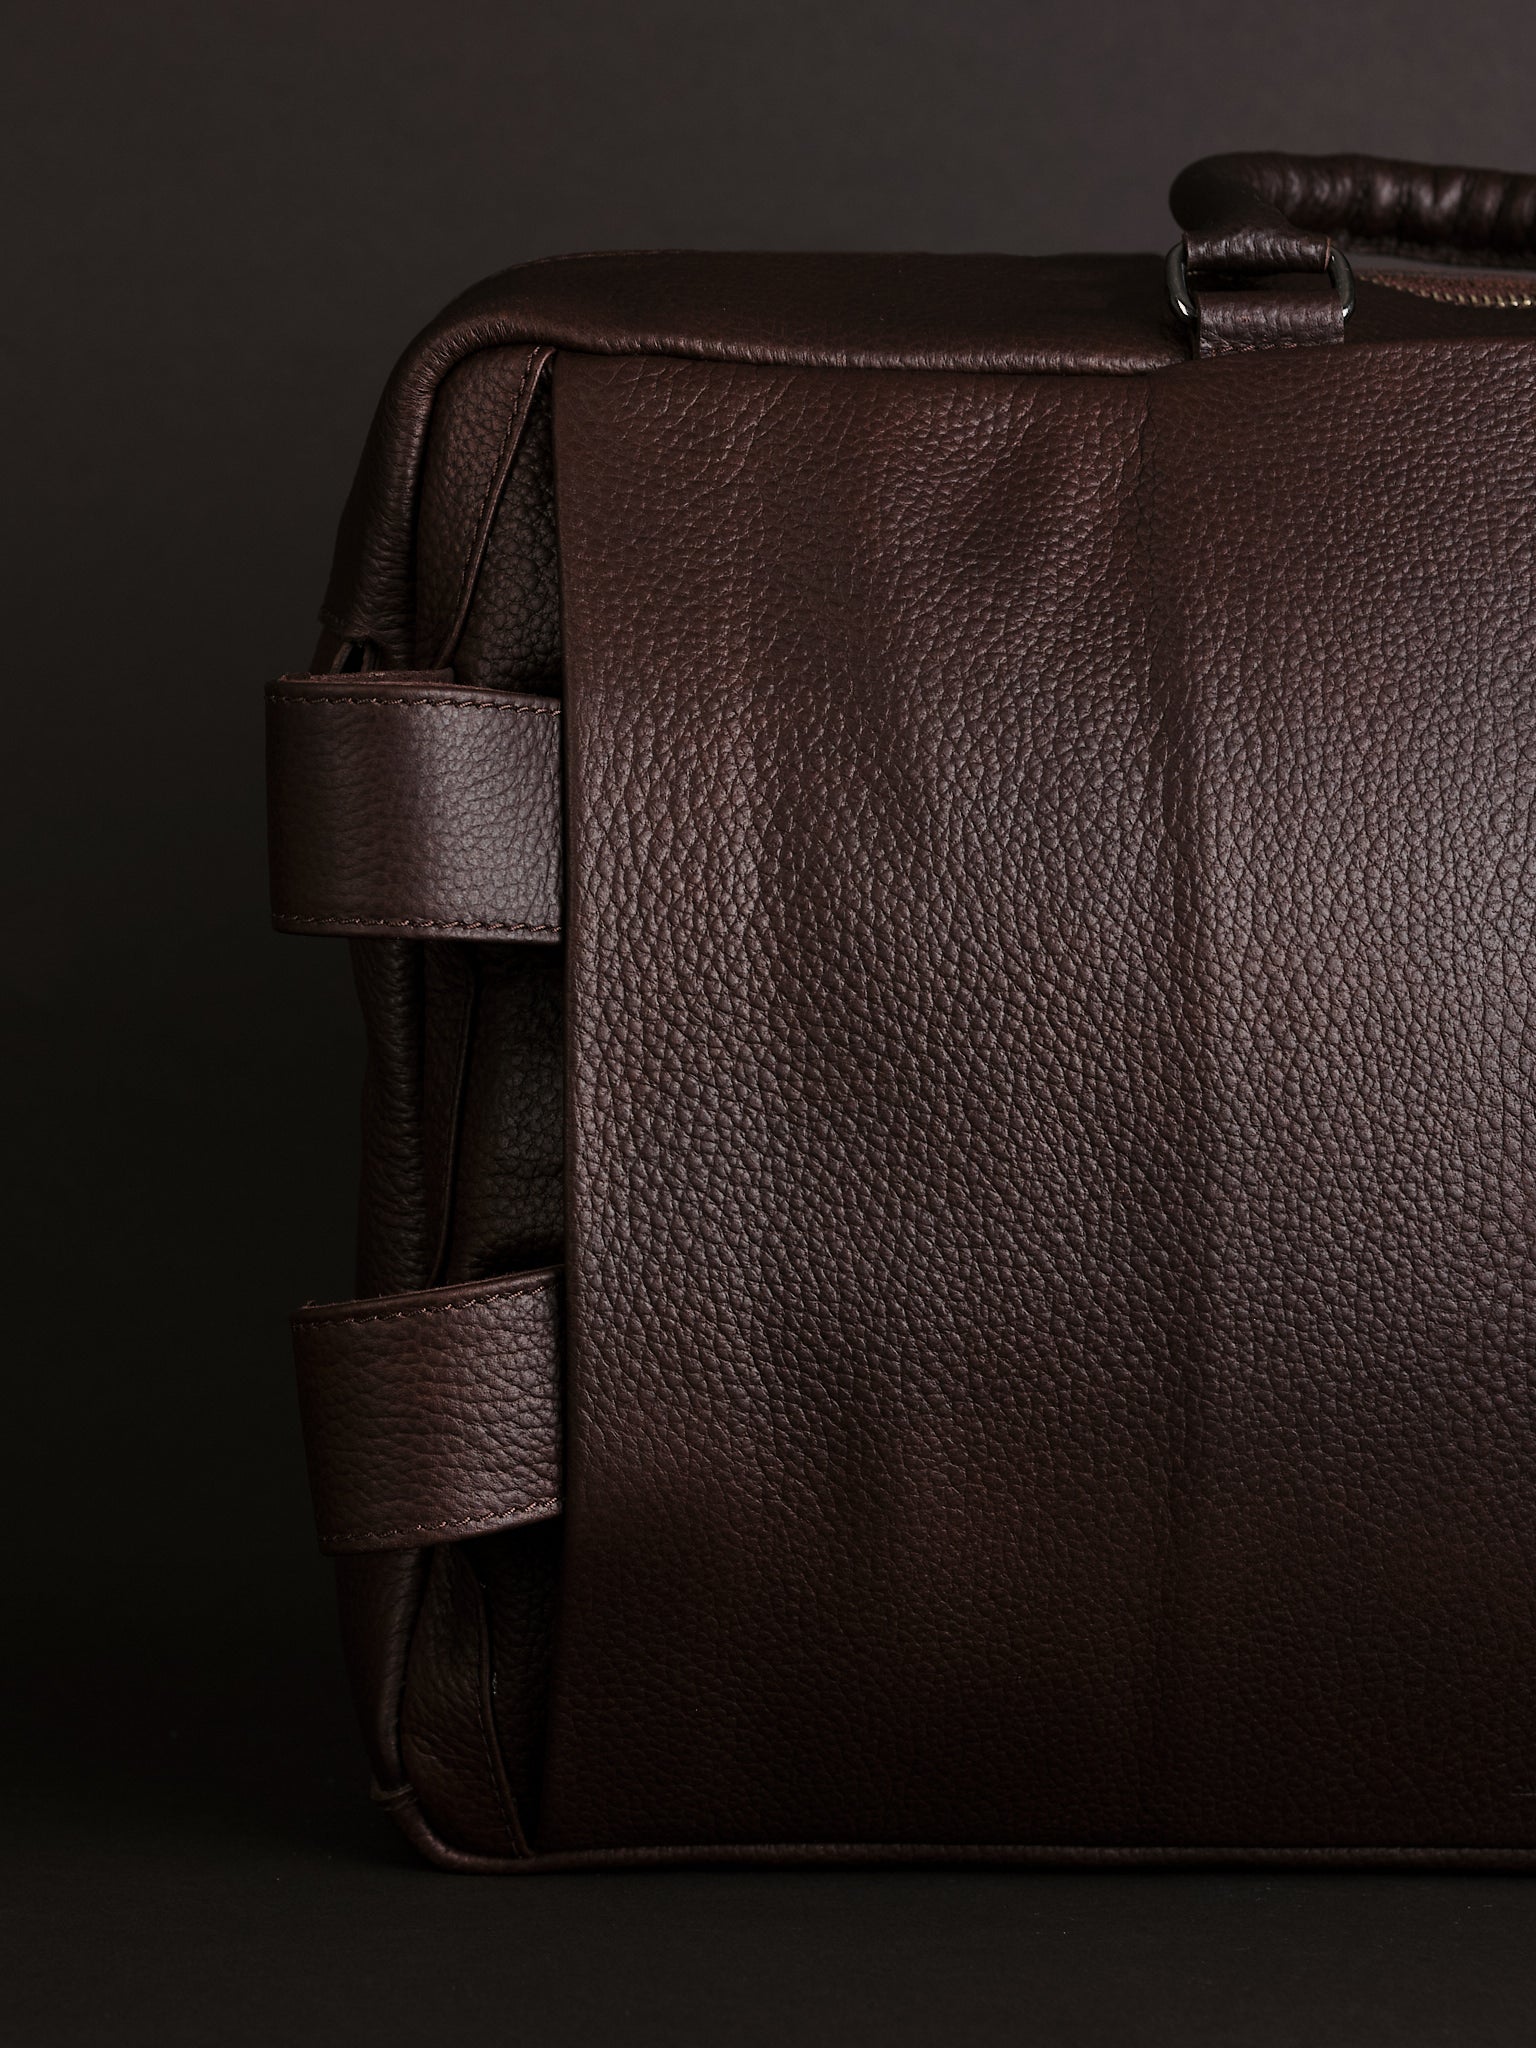 Pull-out Shoulder Straps. Leather Backpack Briefcase Mens Dark Brown Leather Briefcase by Capra